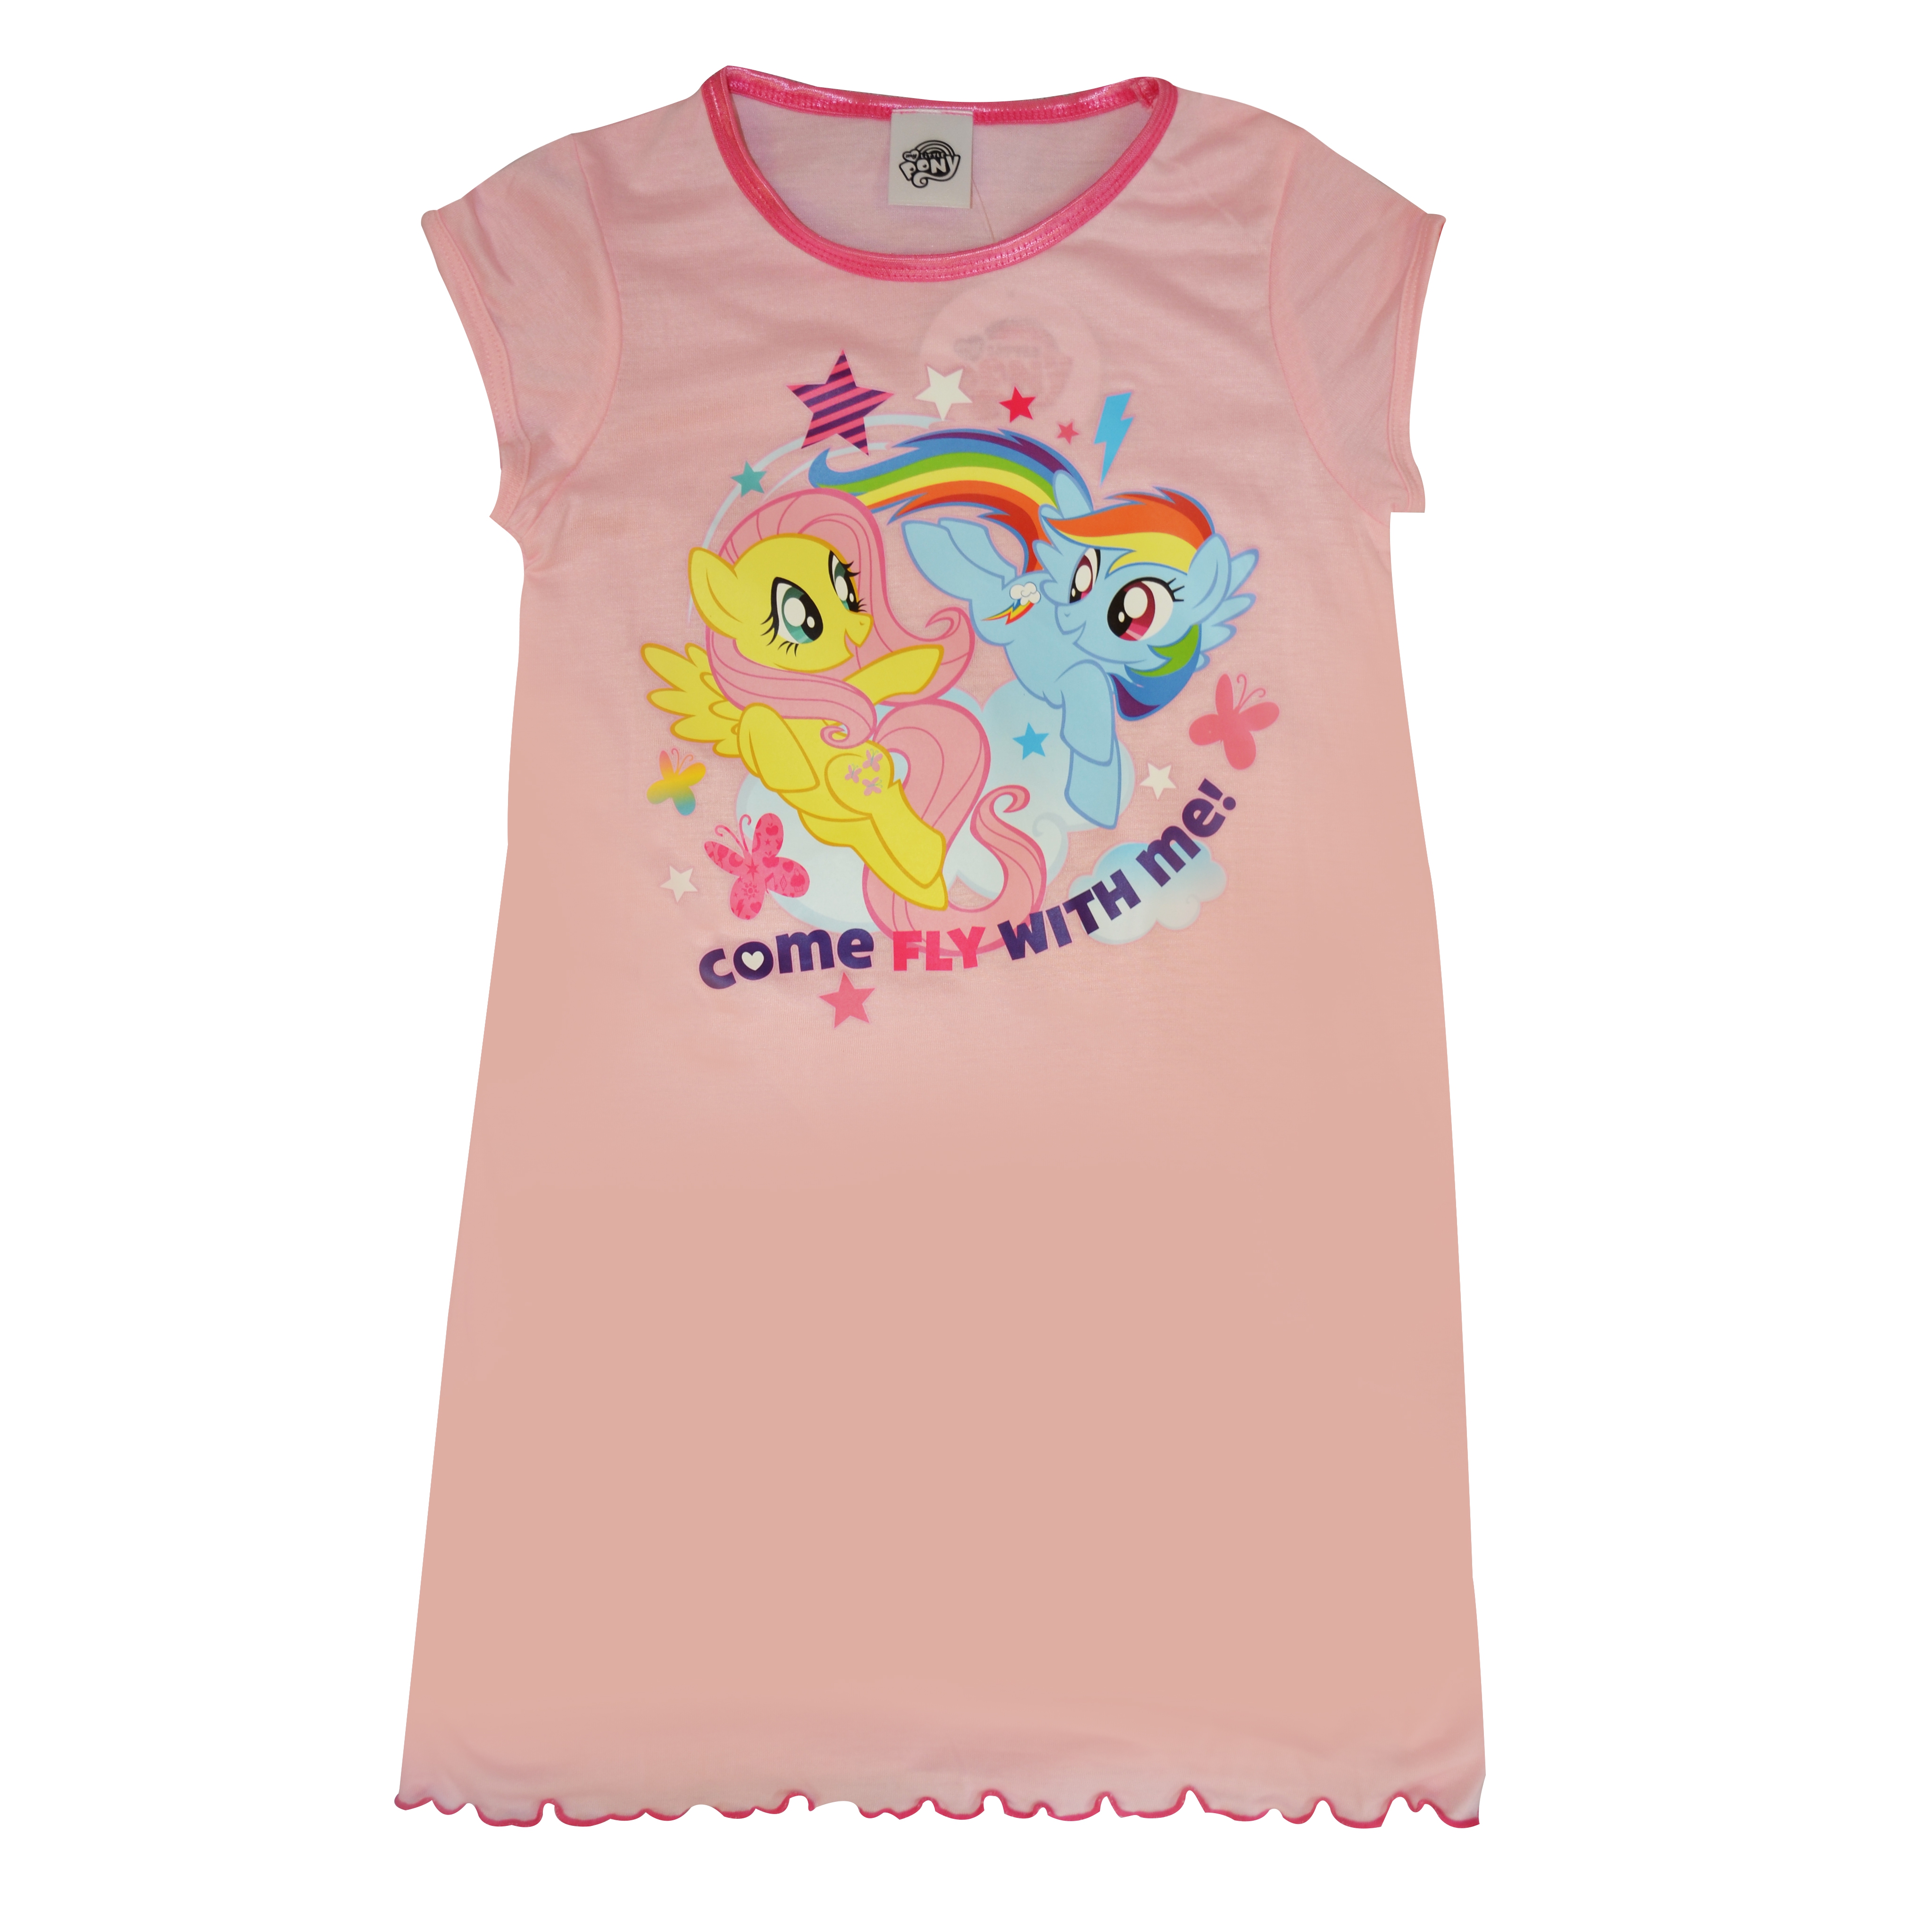 My Little Pony 'Come Fly with Me' 7-8 Years Nighty